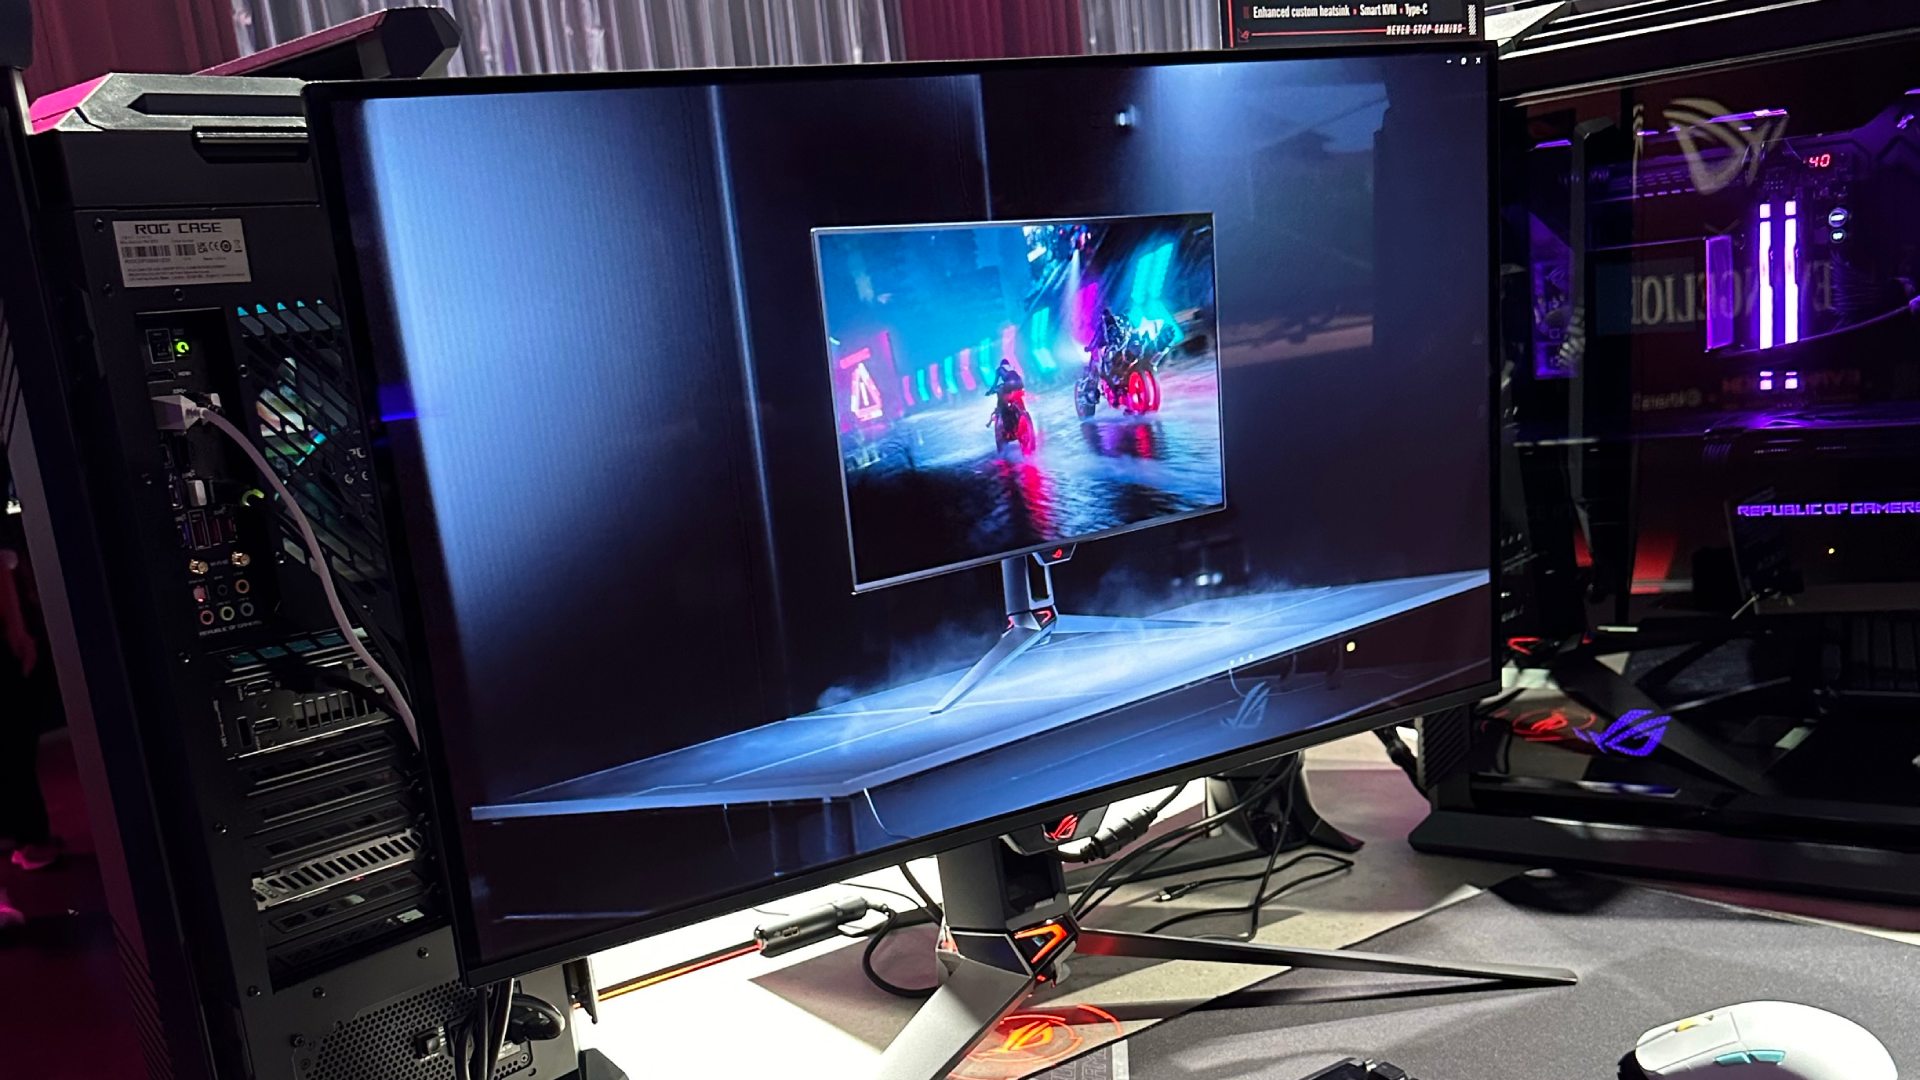 ASUS ROG Swift OLED Gaming monitor with 2K resolution & 240Hz refresh rate  up for pre-order in US & UK - Gizmochina